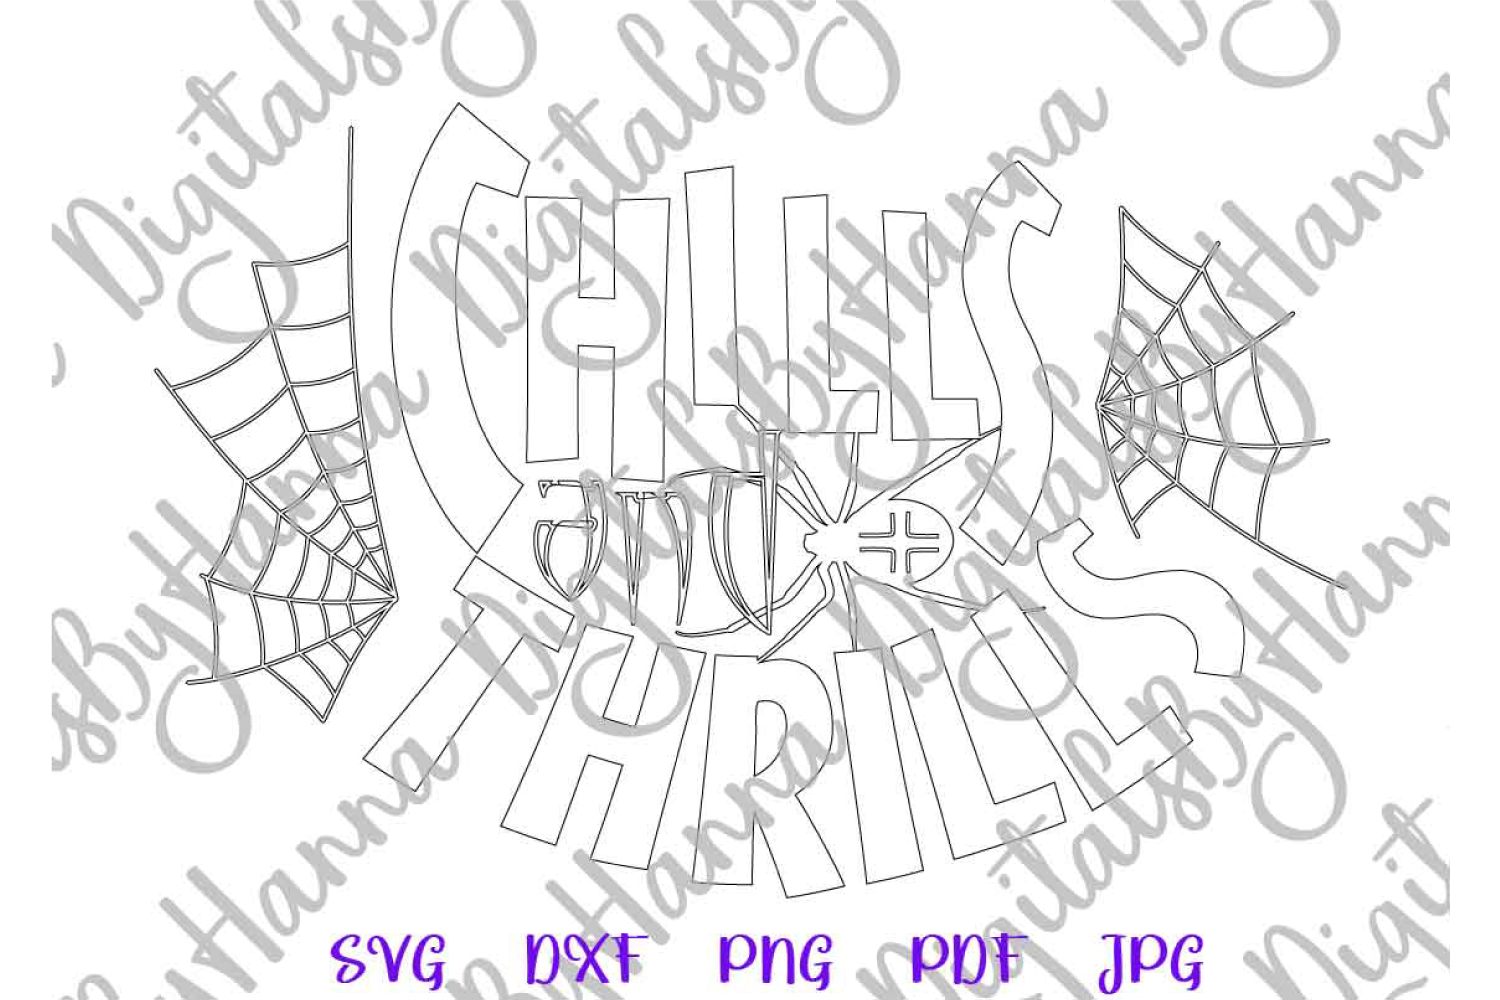 Halloween SVG Chills and Thrills Cut File DXF PNG JPG PDF